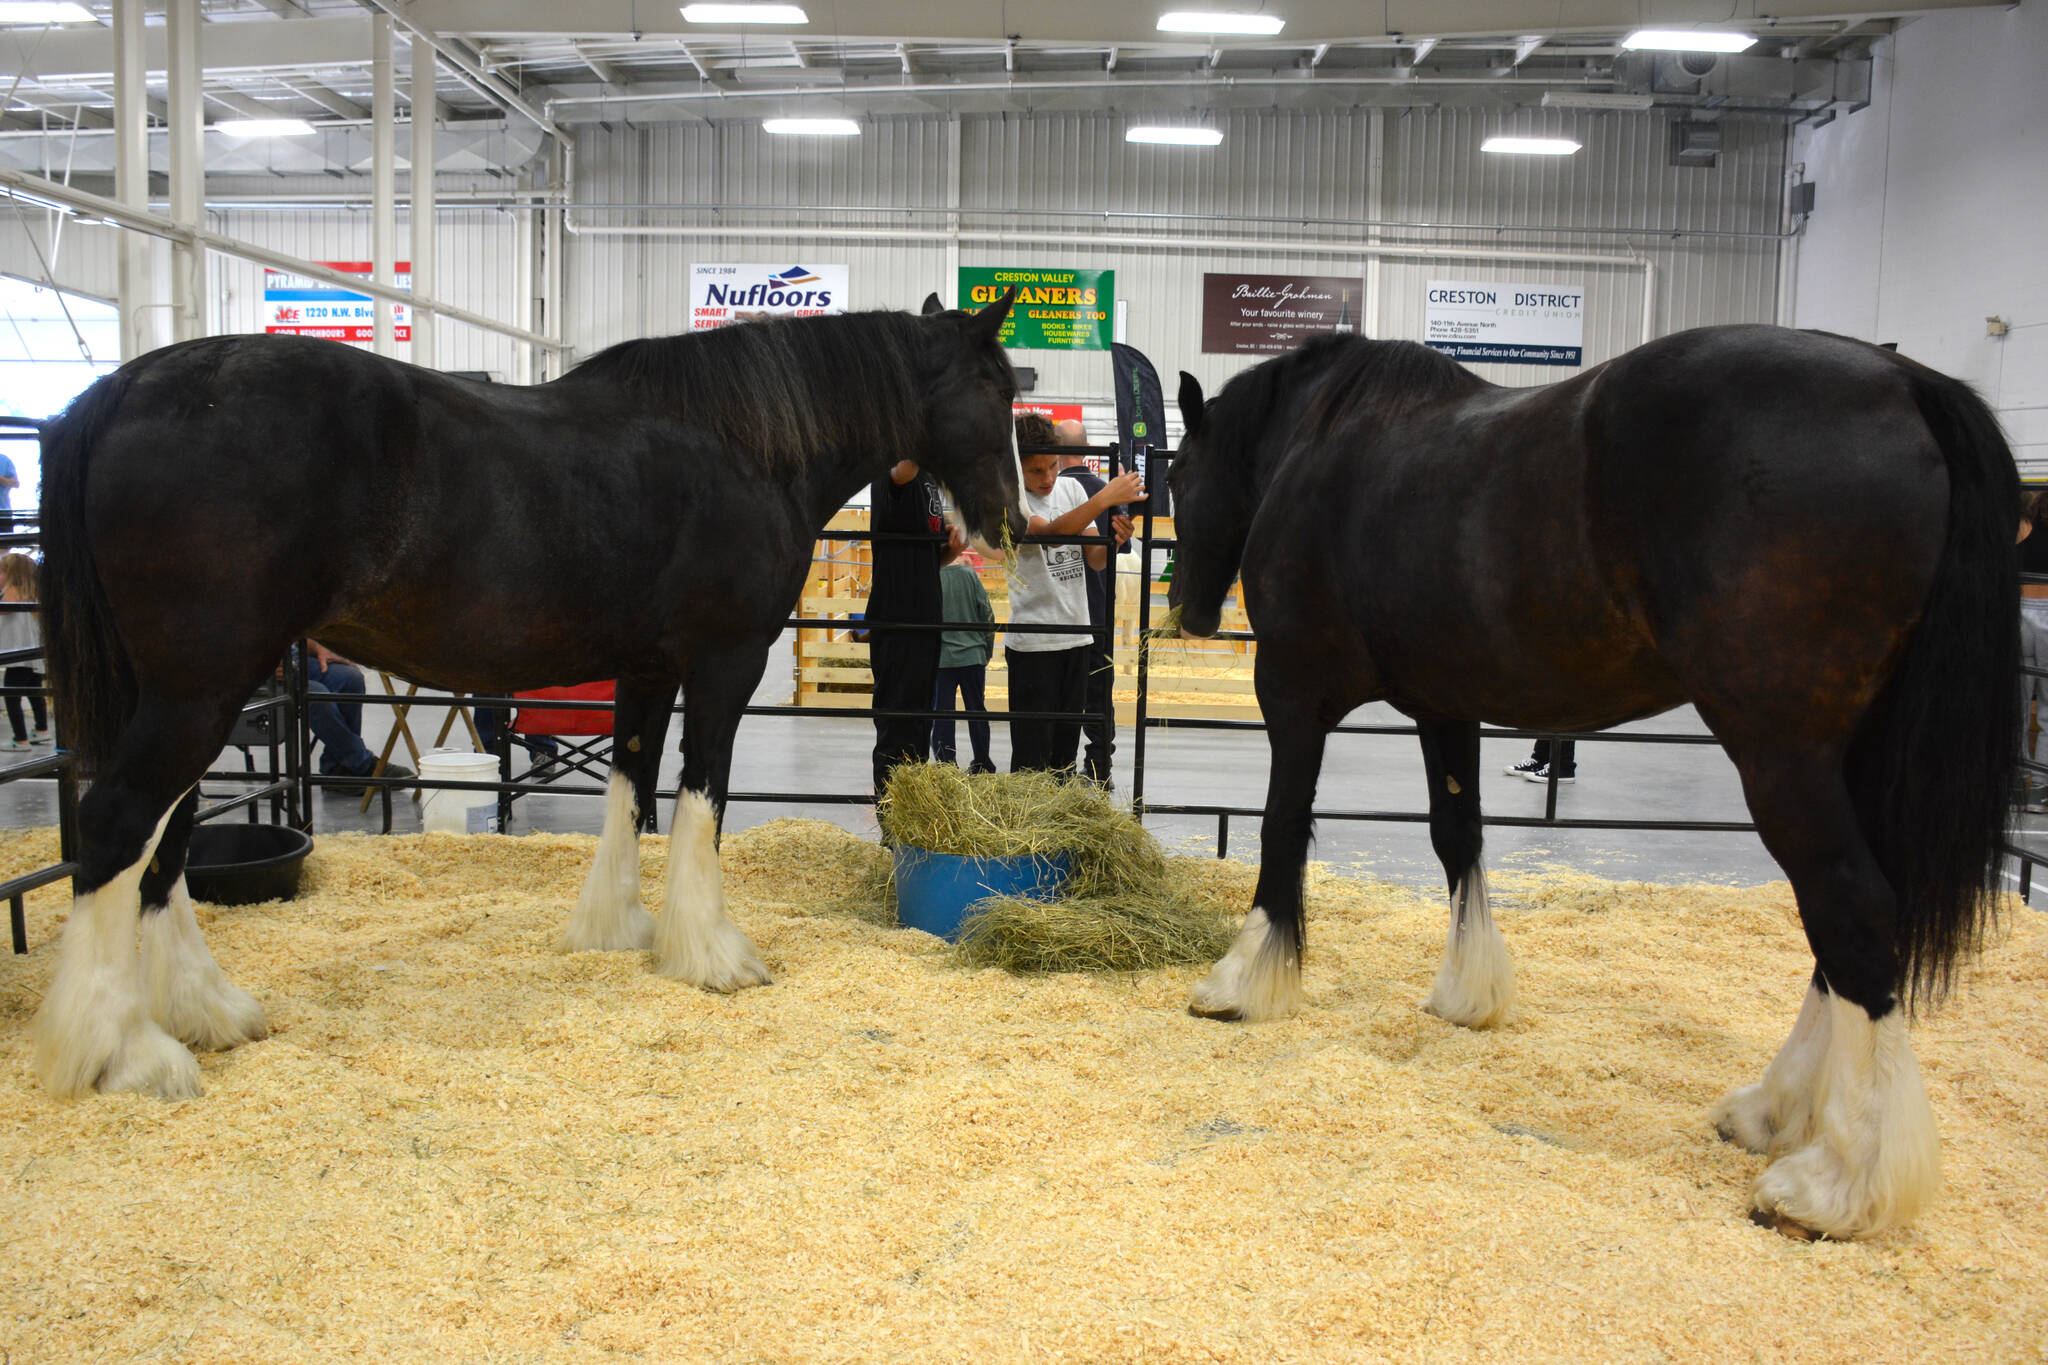 Two Clydesdale horses greeted crowds at the fair. (Photo by Kelsey Yates)